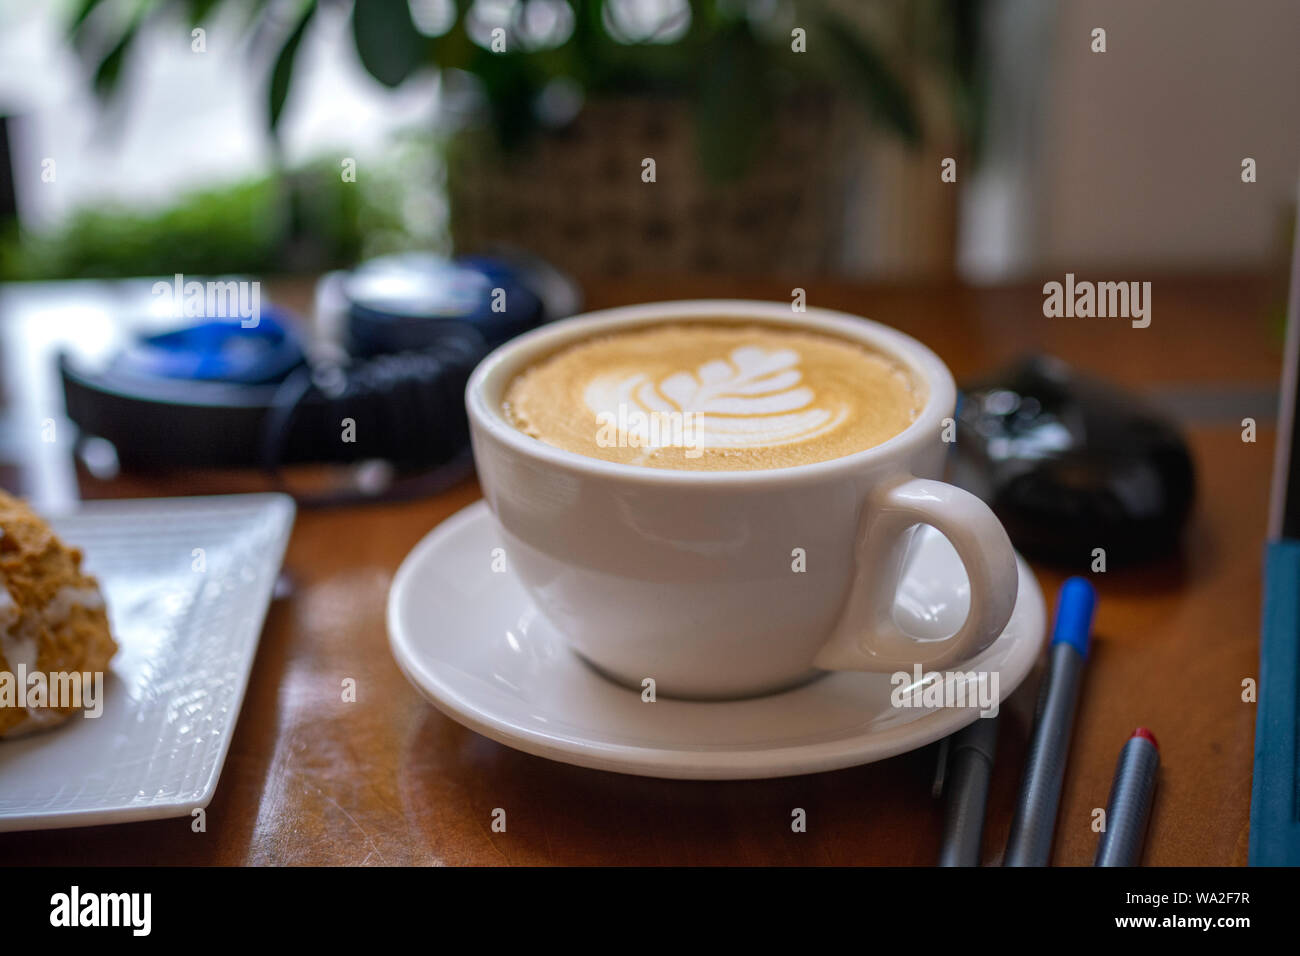 Studying wiht a delicious latte surounded by study materials and electronics. Stock Photo